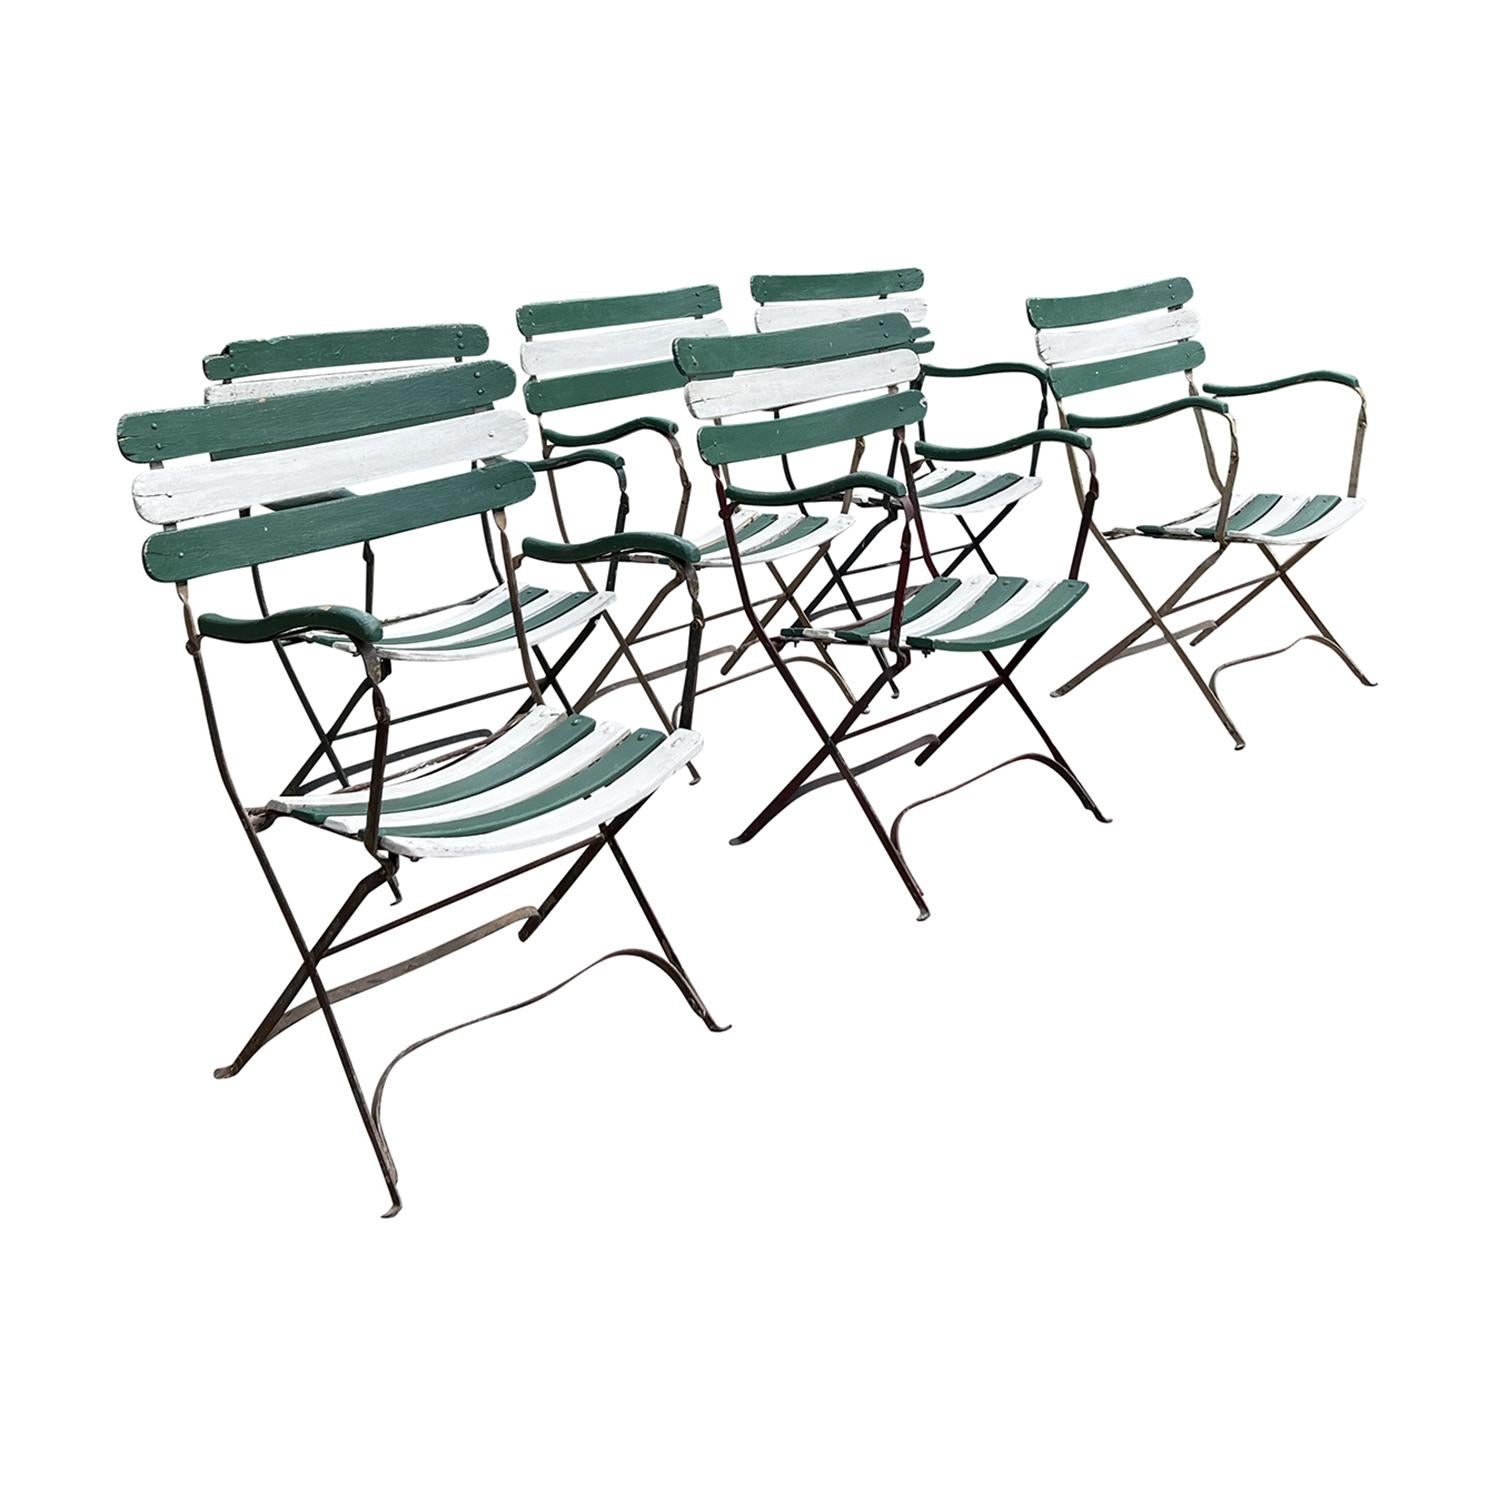 A set of six antique wrought iron and wood slat French Garden armchairs in the Bois de Boulogne style, in good condition. Painted with an alternate pattern of charming green and white wooden back and seat slats, very comfortable style and form.